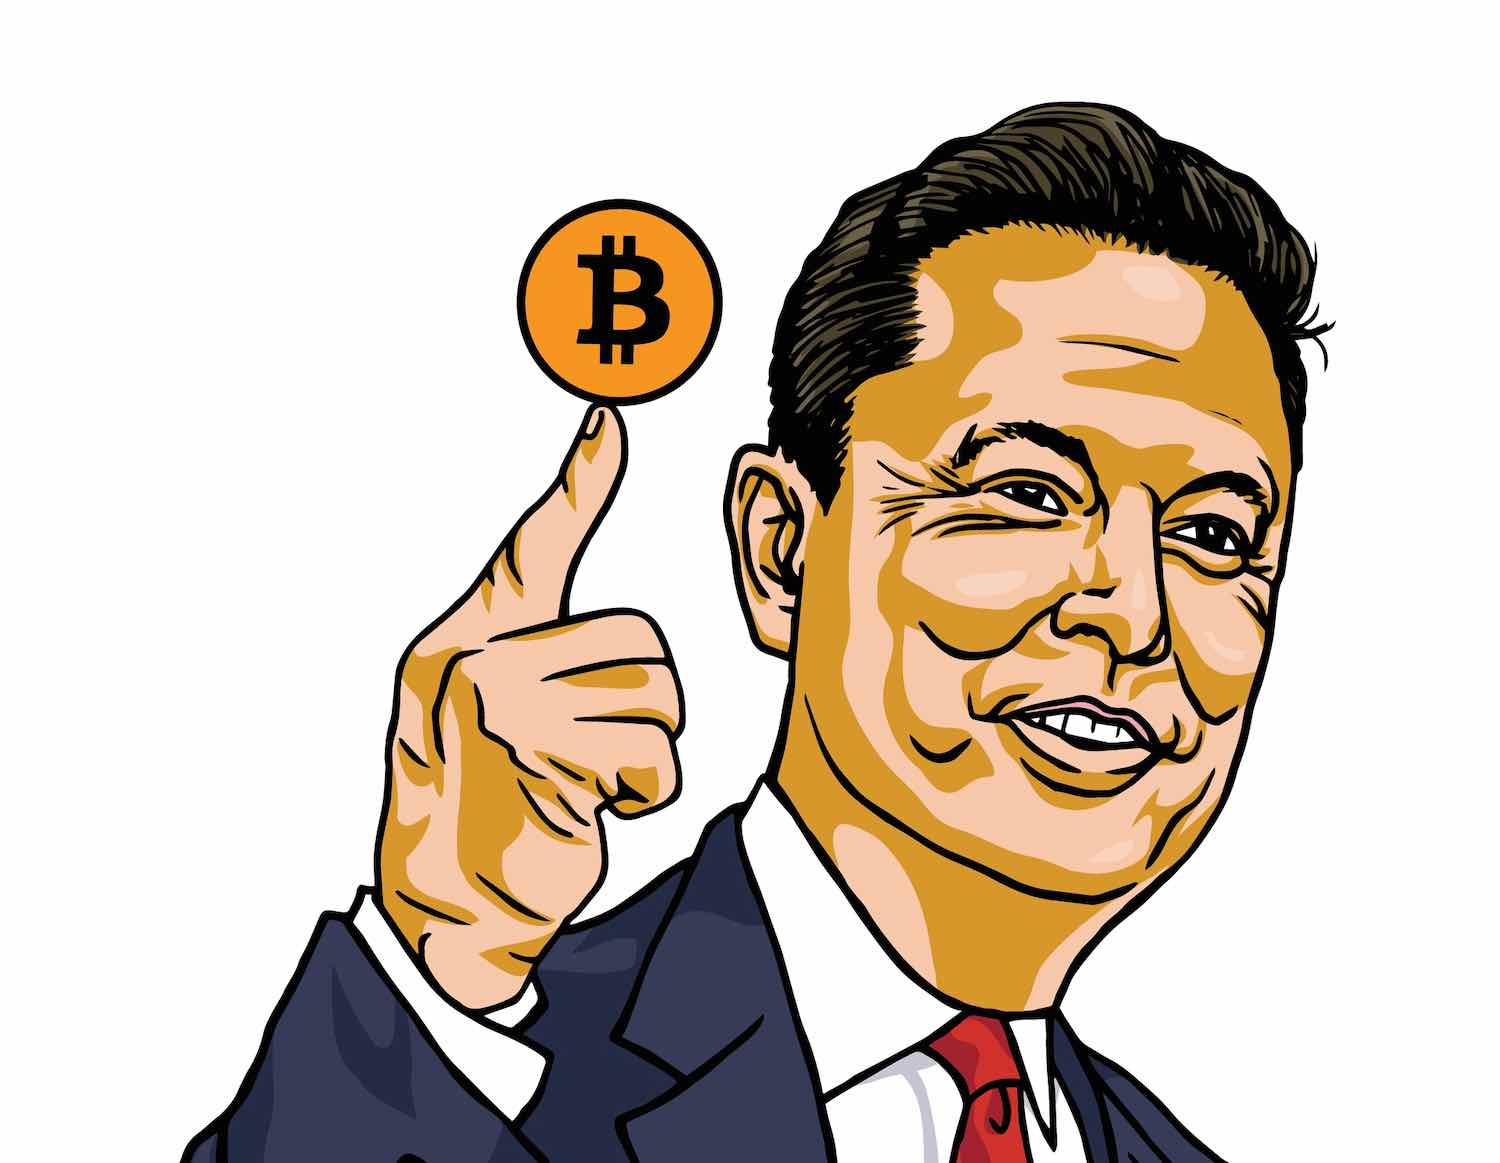 Illustration of Elon Musk with a bitcoin.